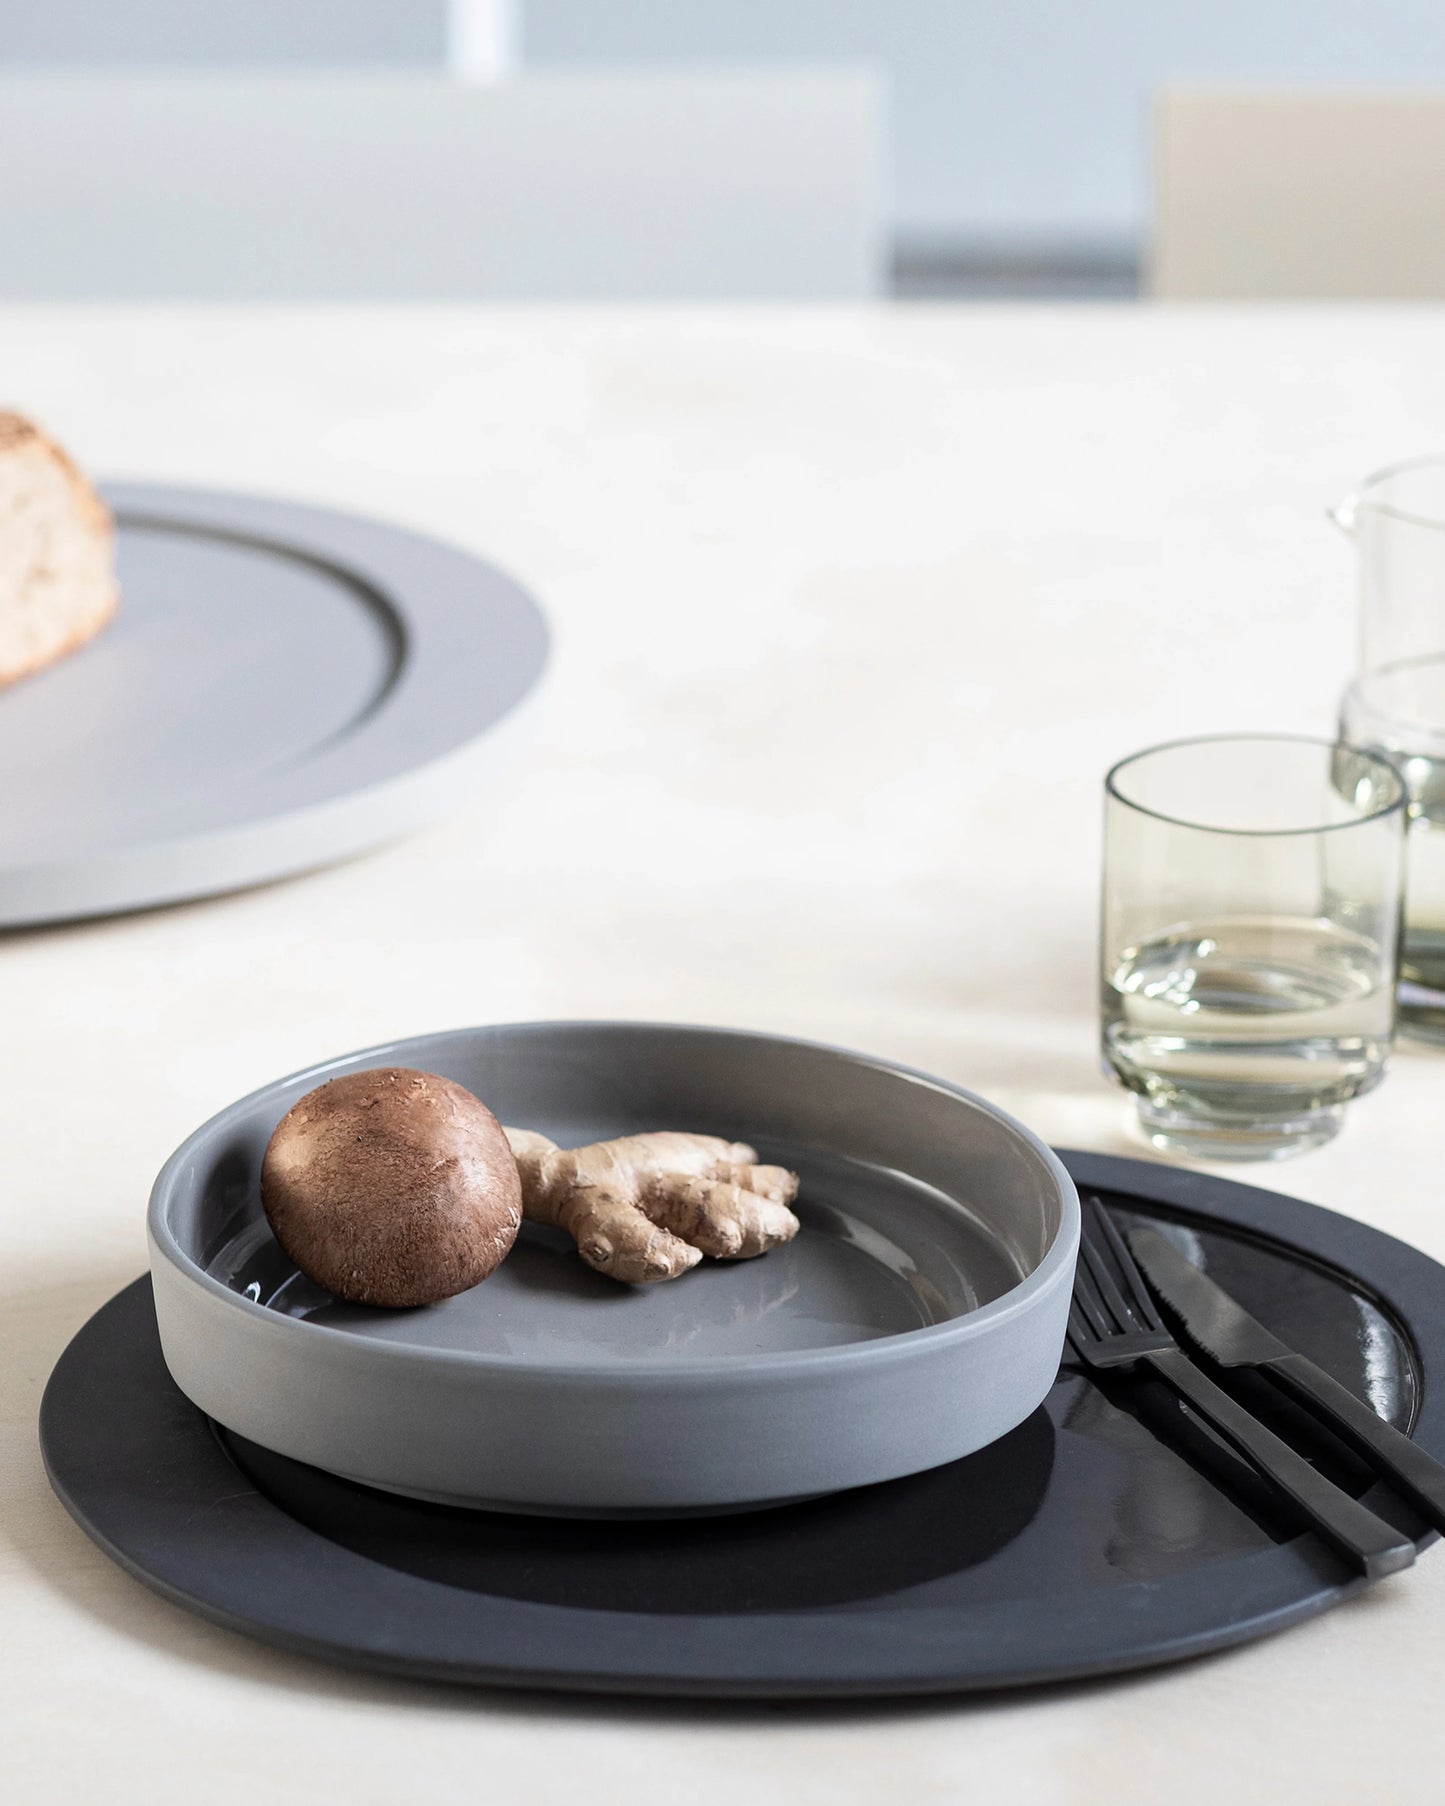 Valerie Objects Inner circle Large Plate, grey by Maarten Baas - $79.00